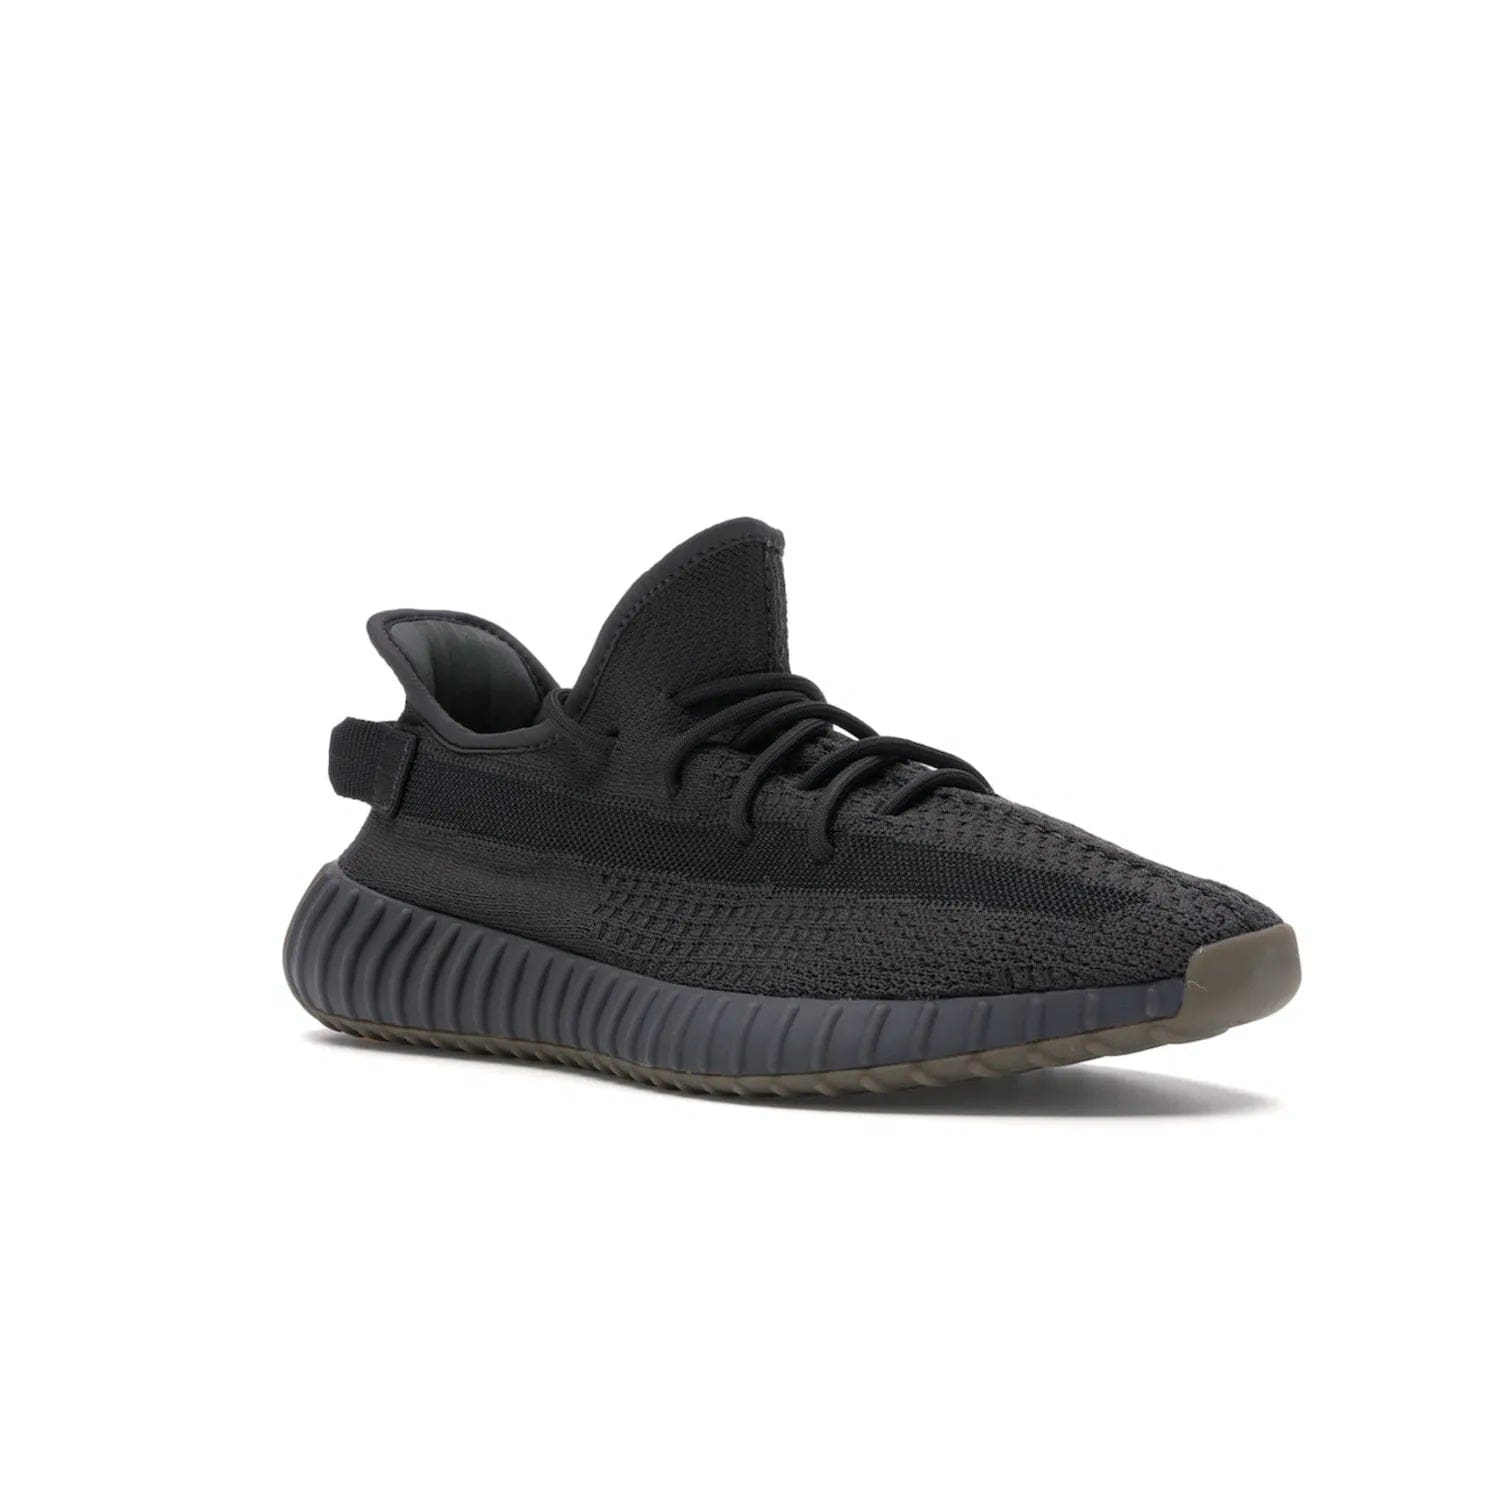 adidas Yeezy Boost 350 V2 Cinder - Image 5 - Only at www.BallersClubKickz.com - Shop for the stylish and eye catching adidas Yeezy 350 V2 Cinder in earth tones. Boost cushioned midsole and gold outsole add a touch of boldness. A timeless addition to any wardrobe.